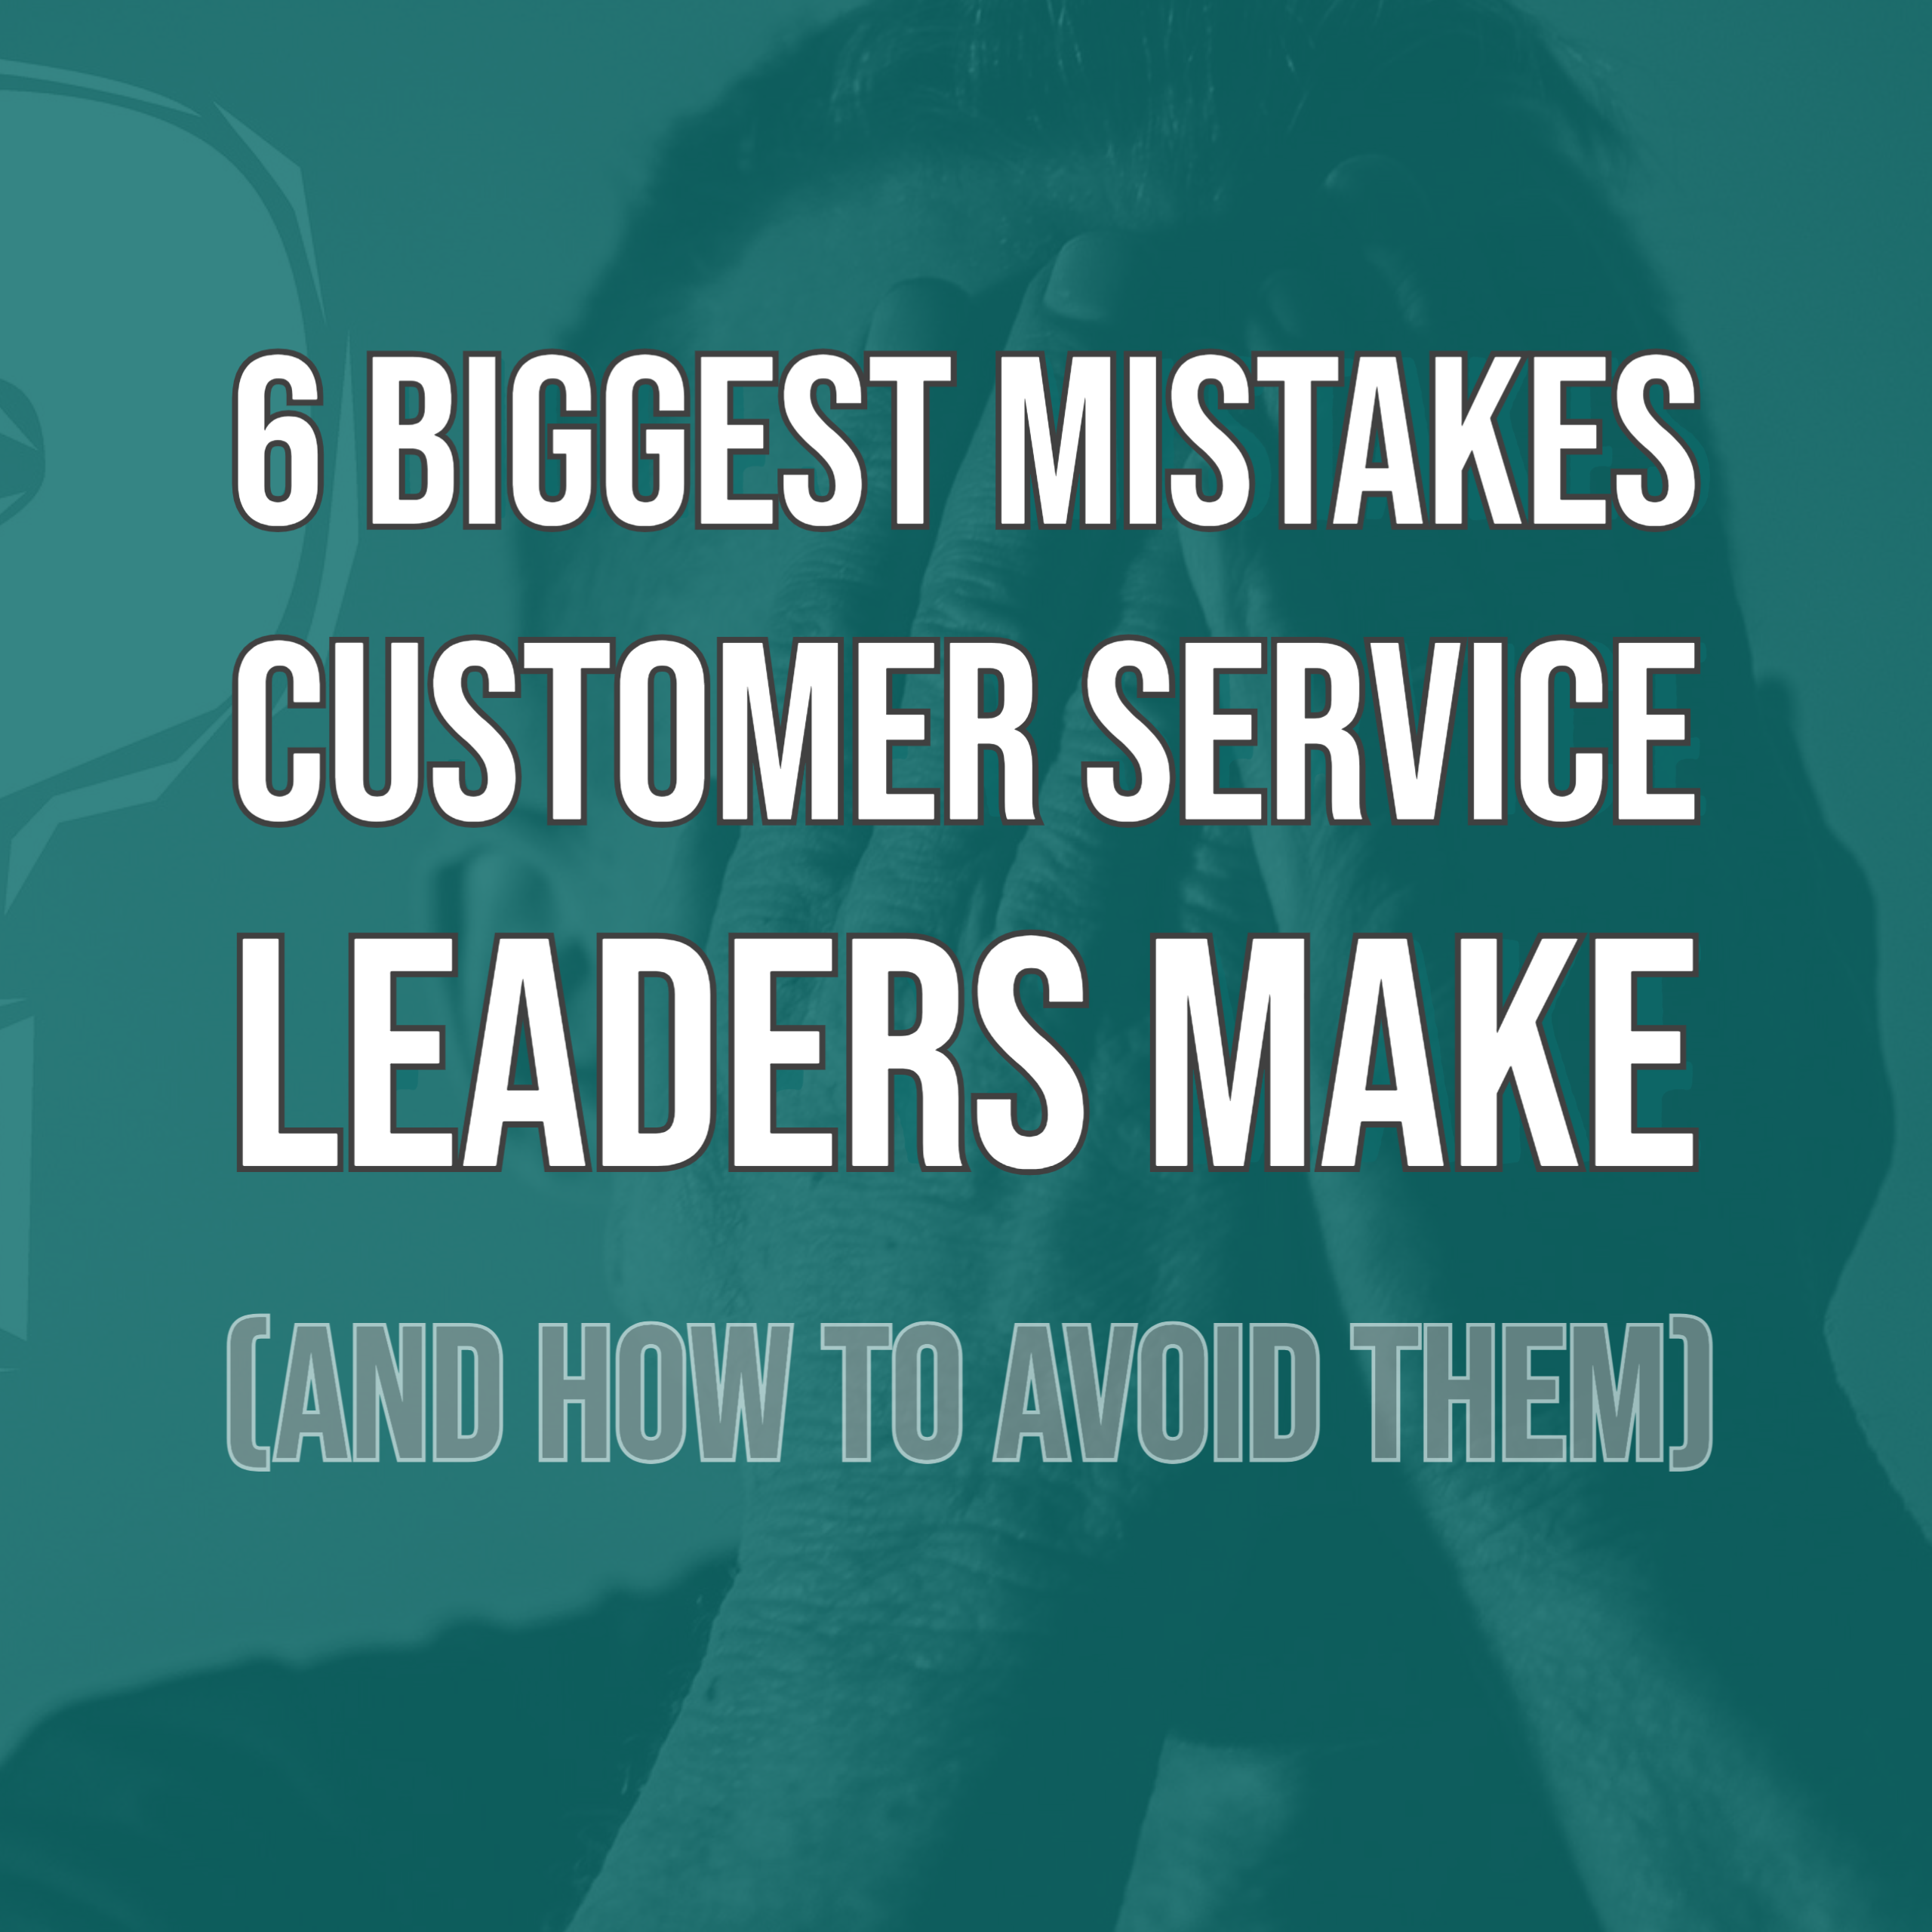 6 biggest mistakes customer service leaders make and how to avoid them on a blue background with a man holding his head in his hands.